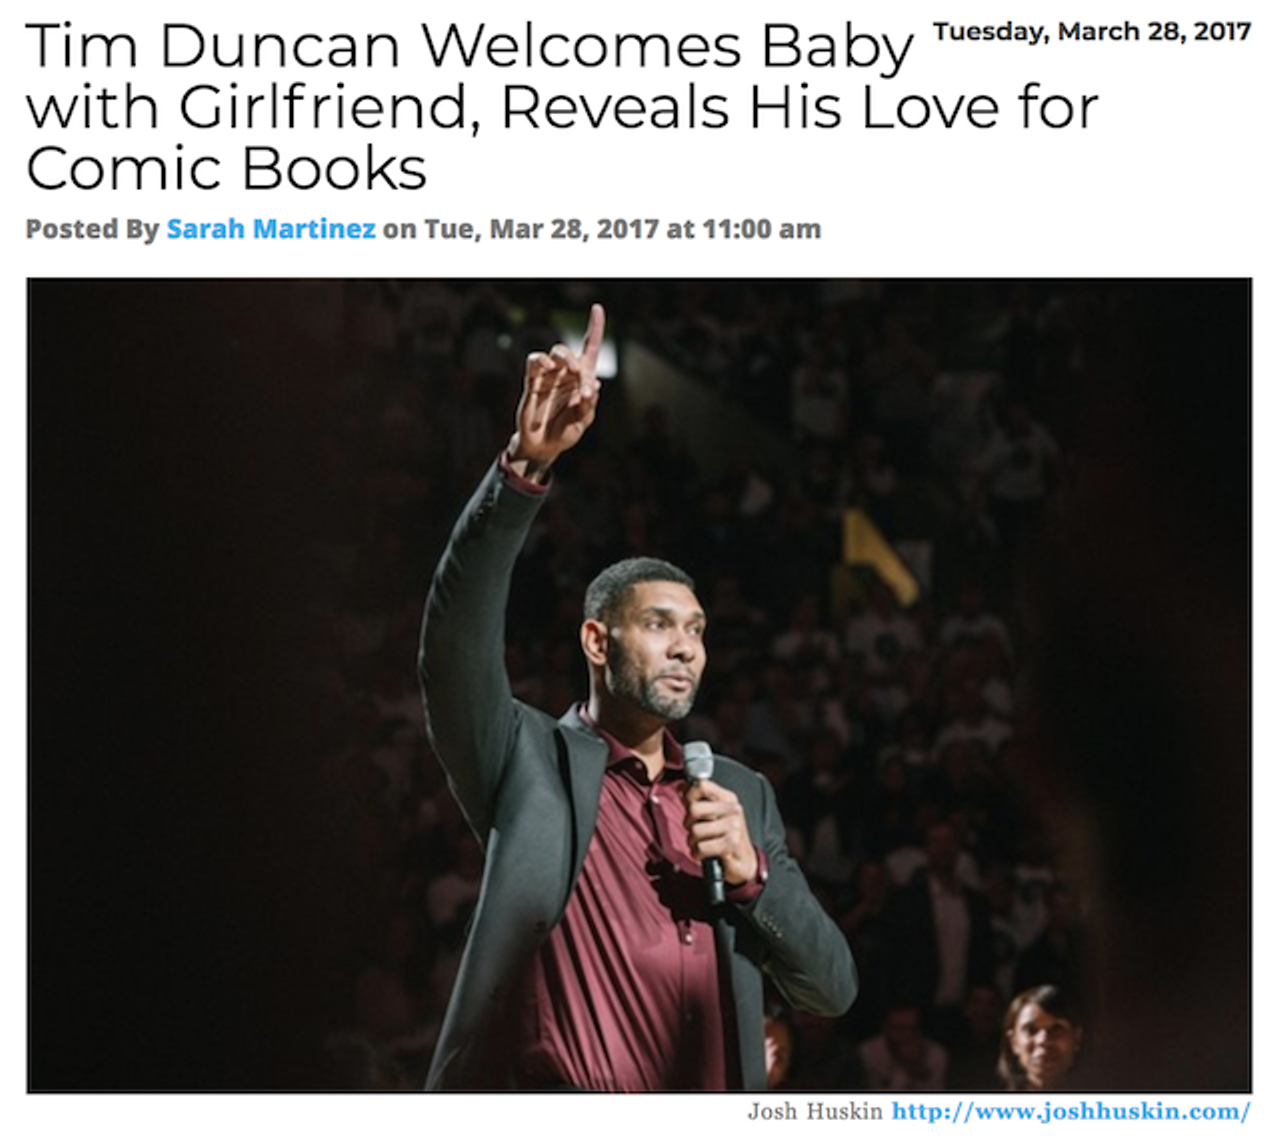 Huge congrats to Spurs hall-of-famer Tim Duncan and his girlfriend Vanessa Macias for having a baby girl in March this year. The couple paid tribute to Guardians of the Galaxy with the super cute baby name: Quill. Read more.